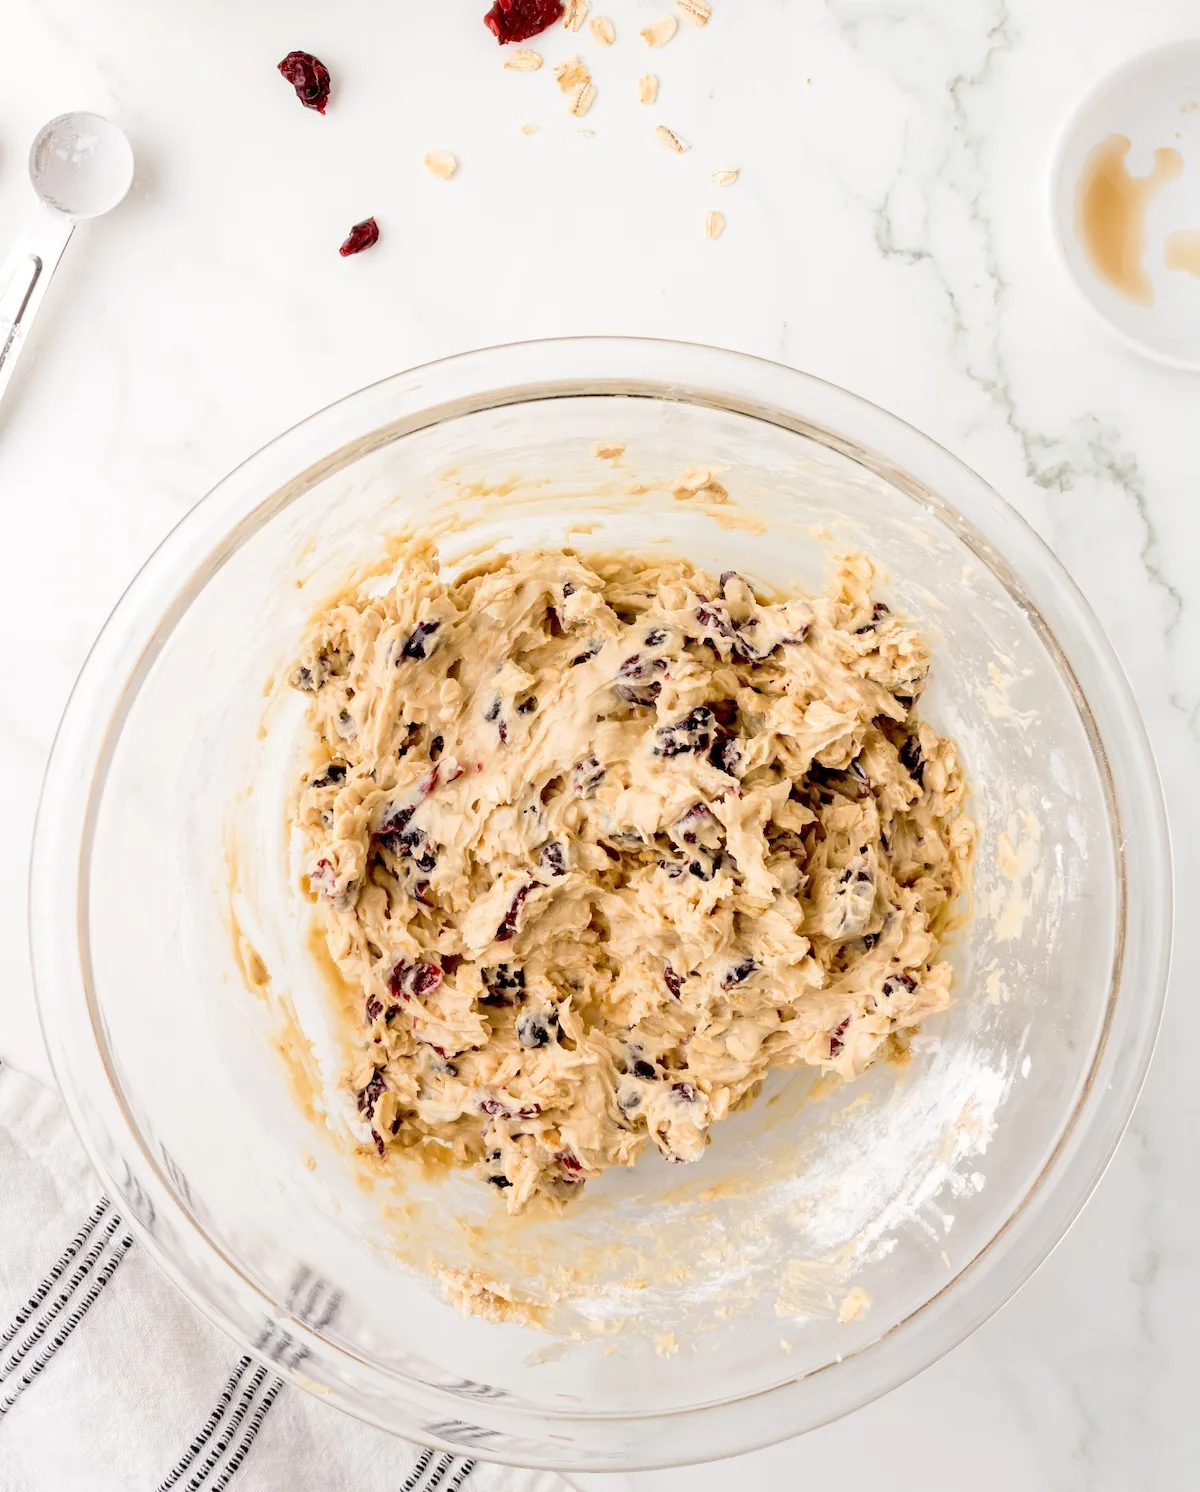 Cranberry cookie dough ready to be chilled in the fridge